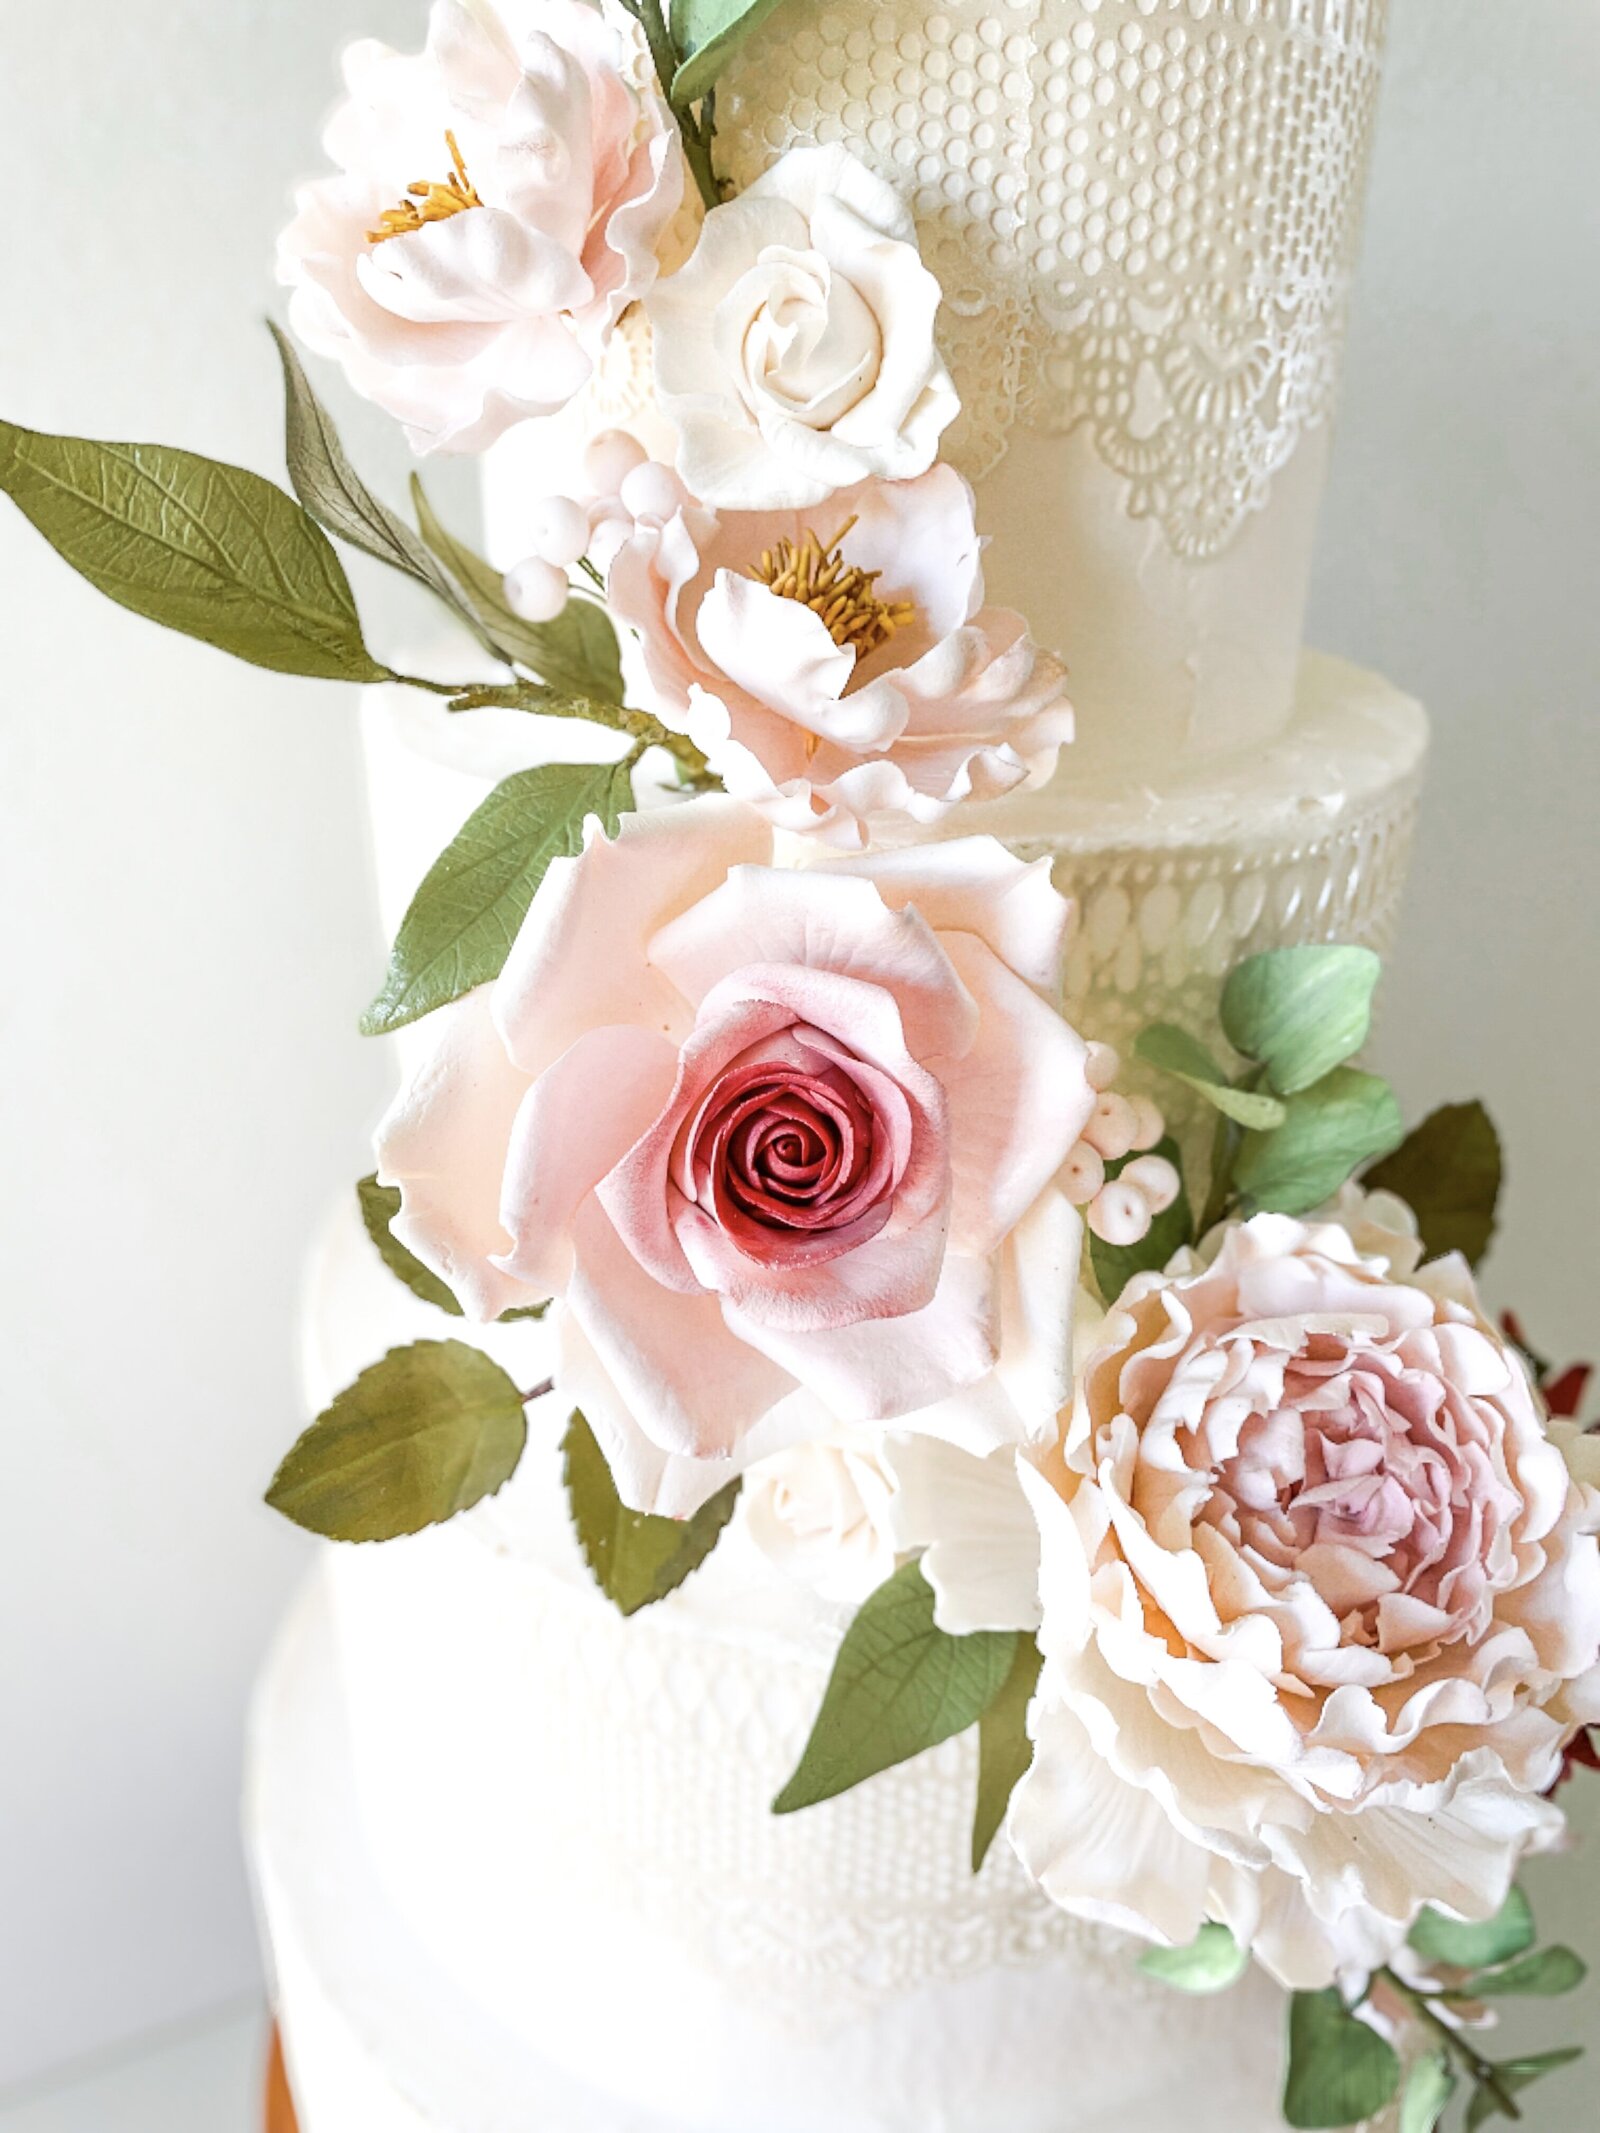 where to buy sugar flowers for wedding cakes